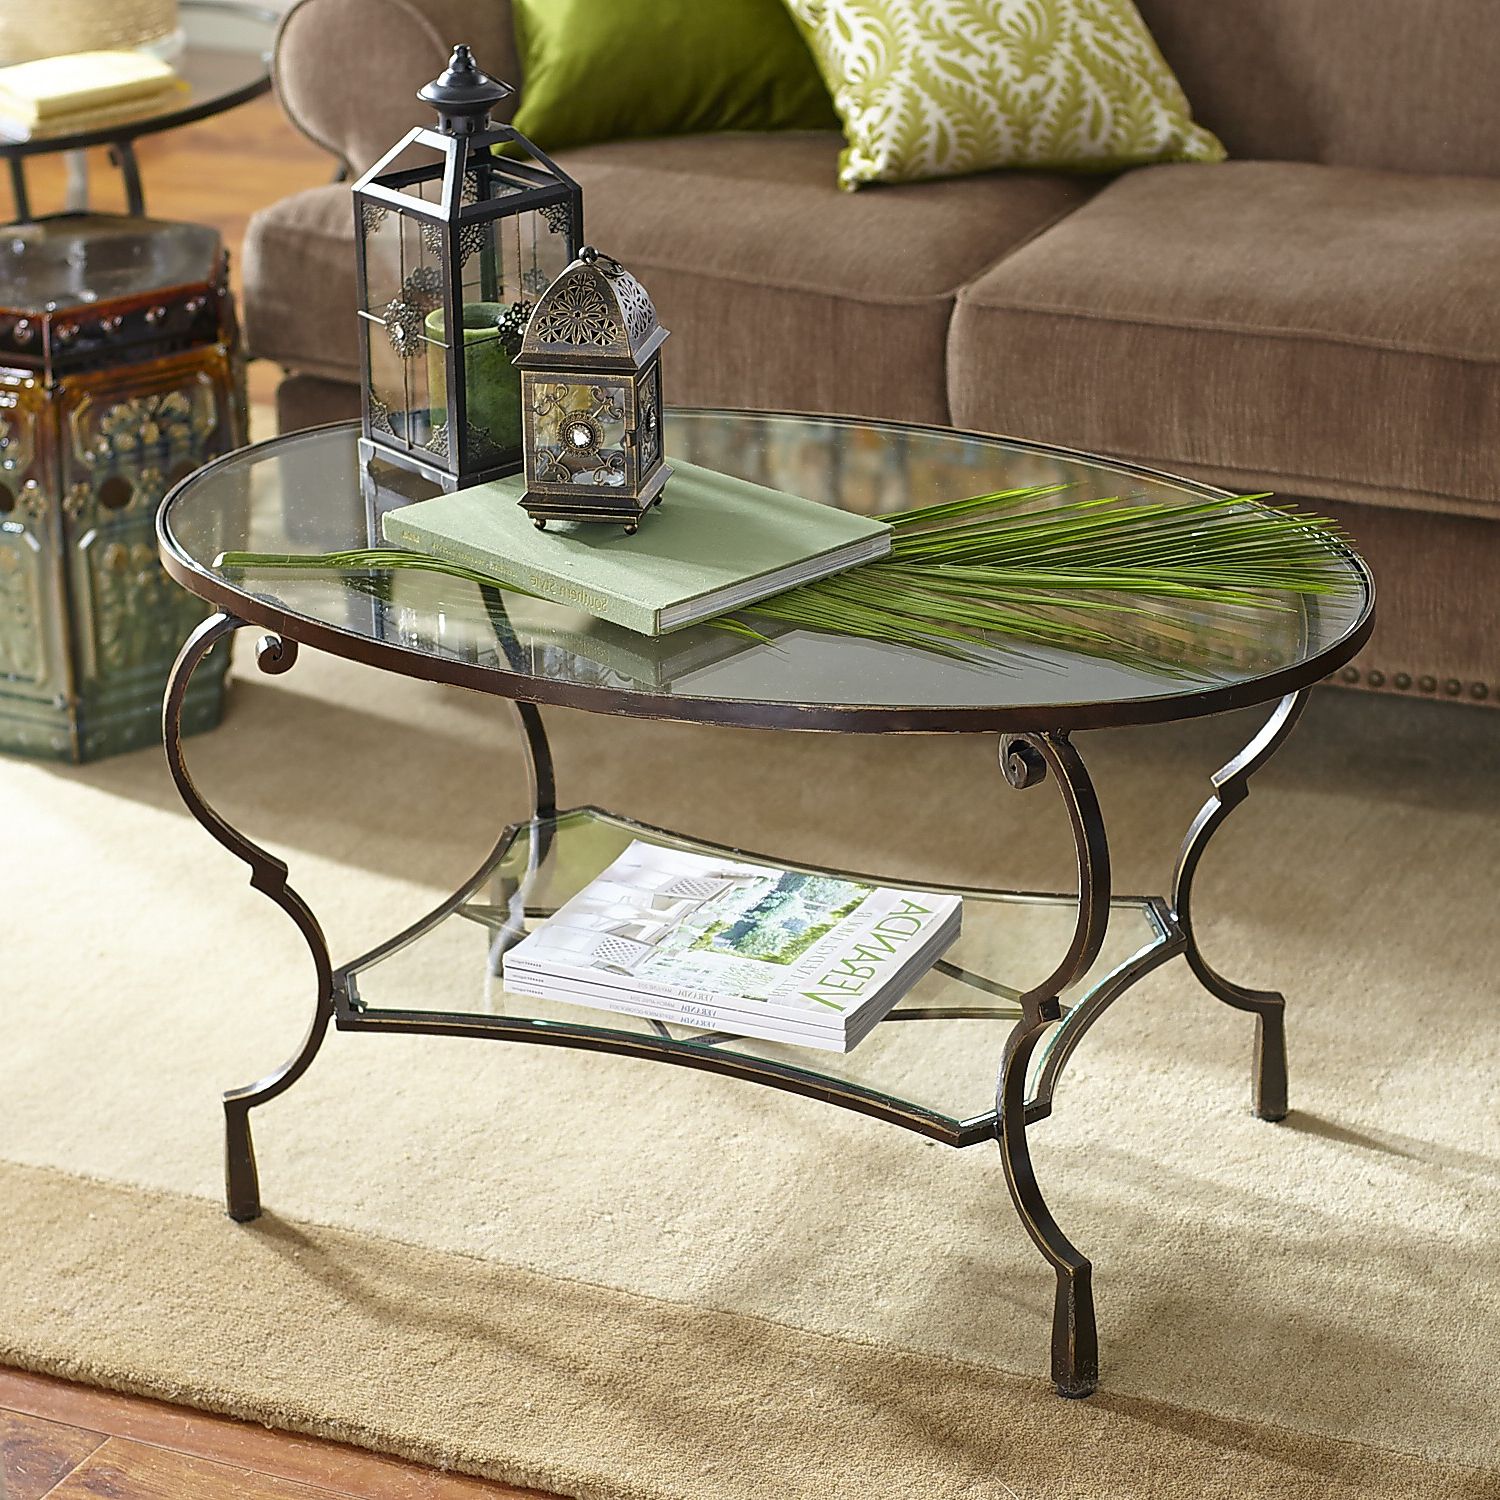 Chasca Glass Top Oval Coffee Table – Pier1 Throughout Most Recently Released Espresso Wood And Glass Top Coffee Tables (View 2 of 20)